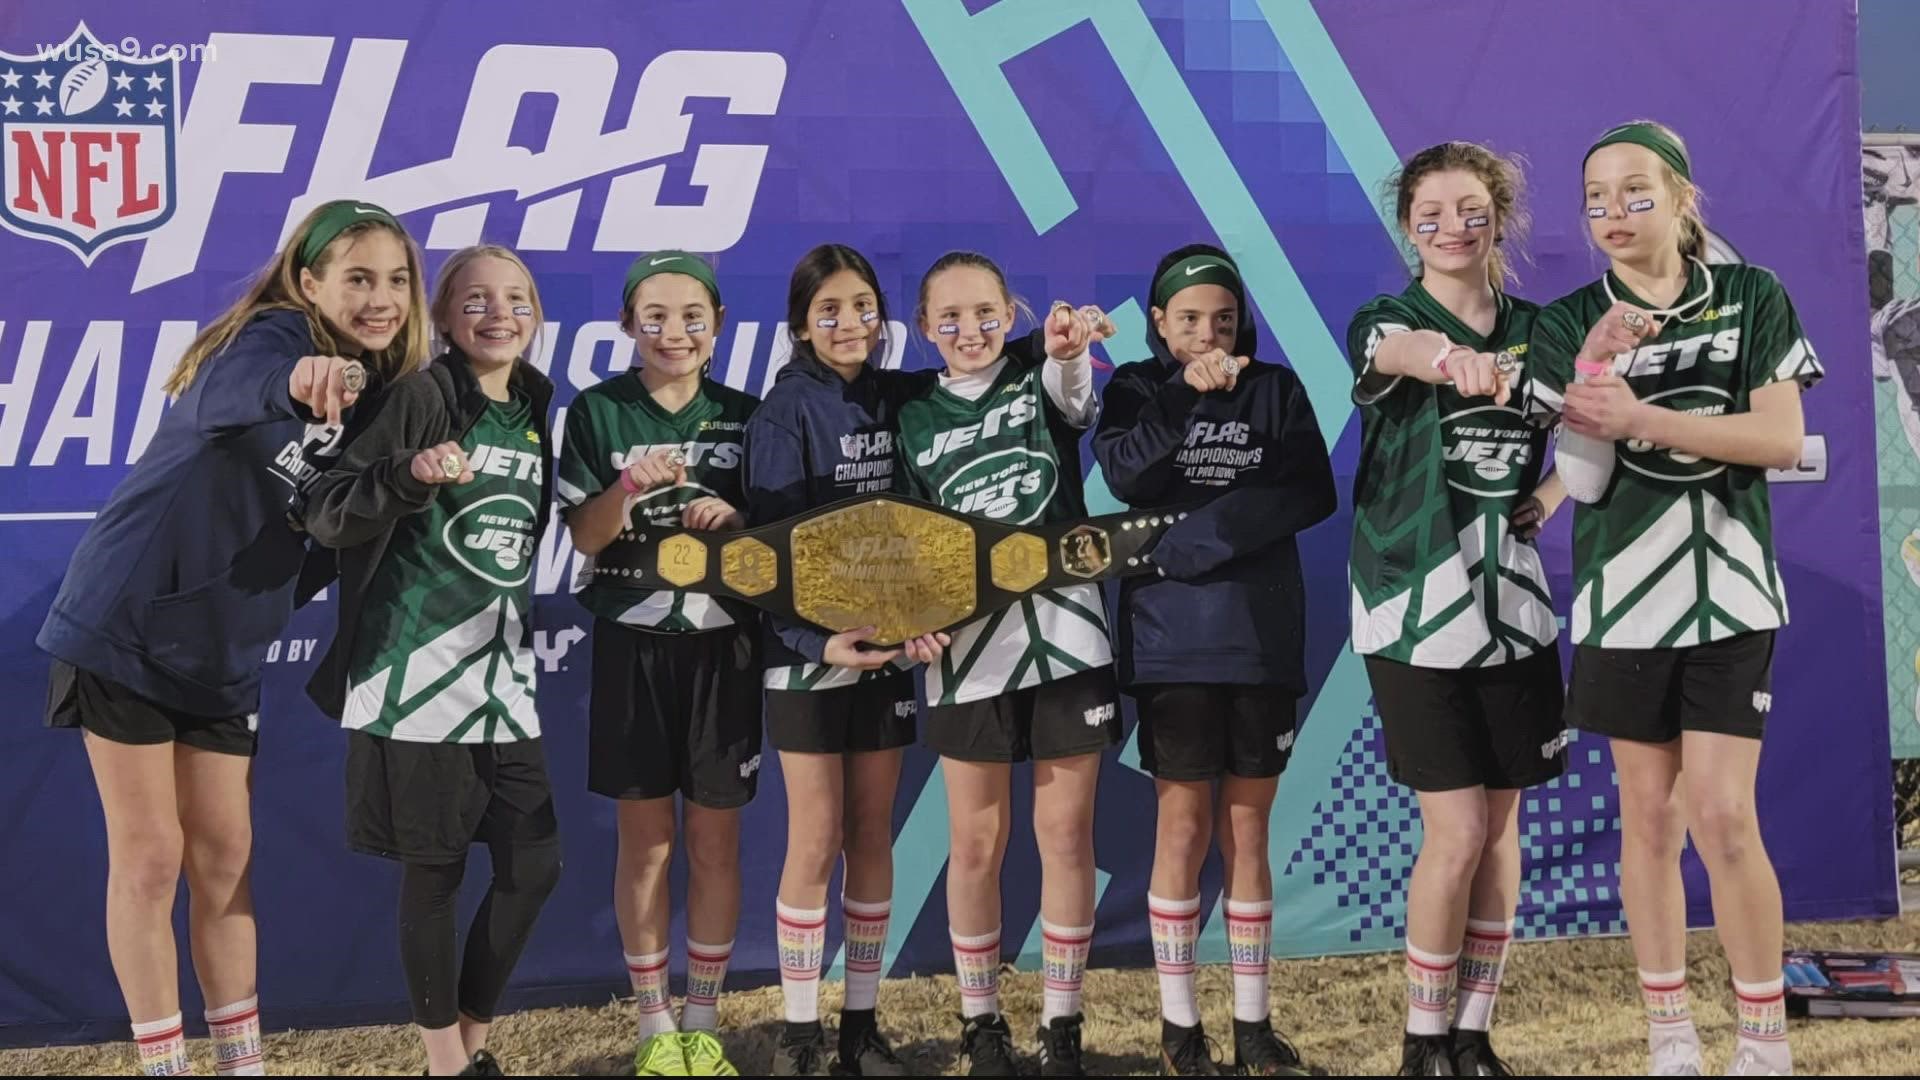 Two teams from Arlington competed and won at the NFL Flag Football Championships in Las Vegas.